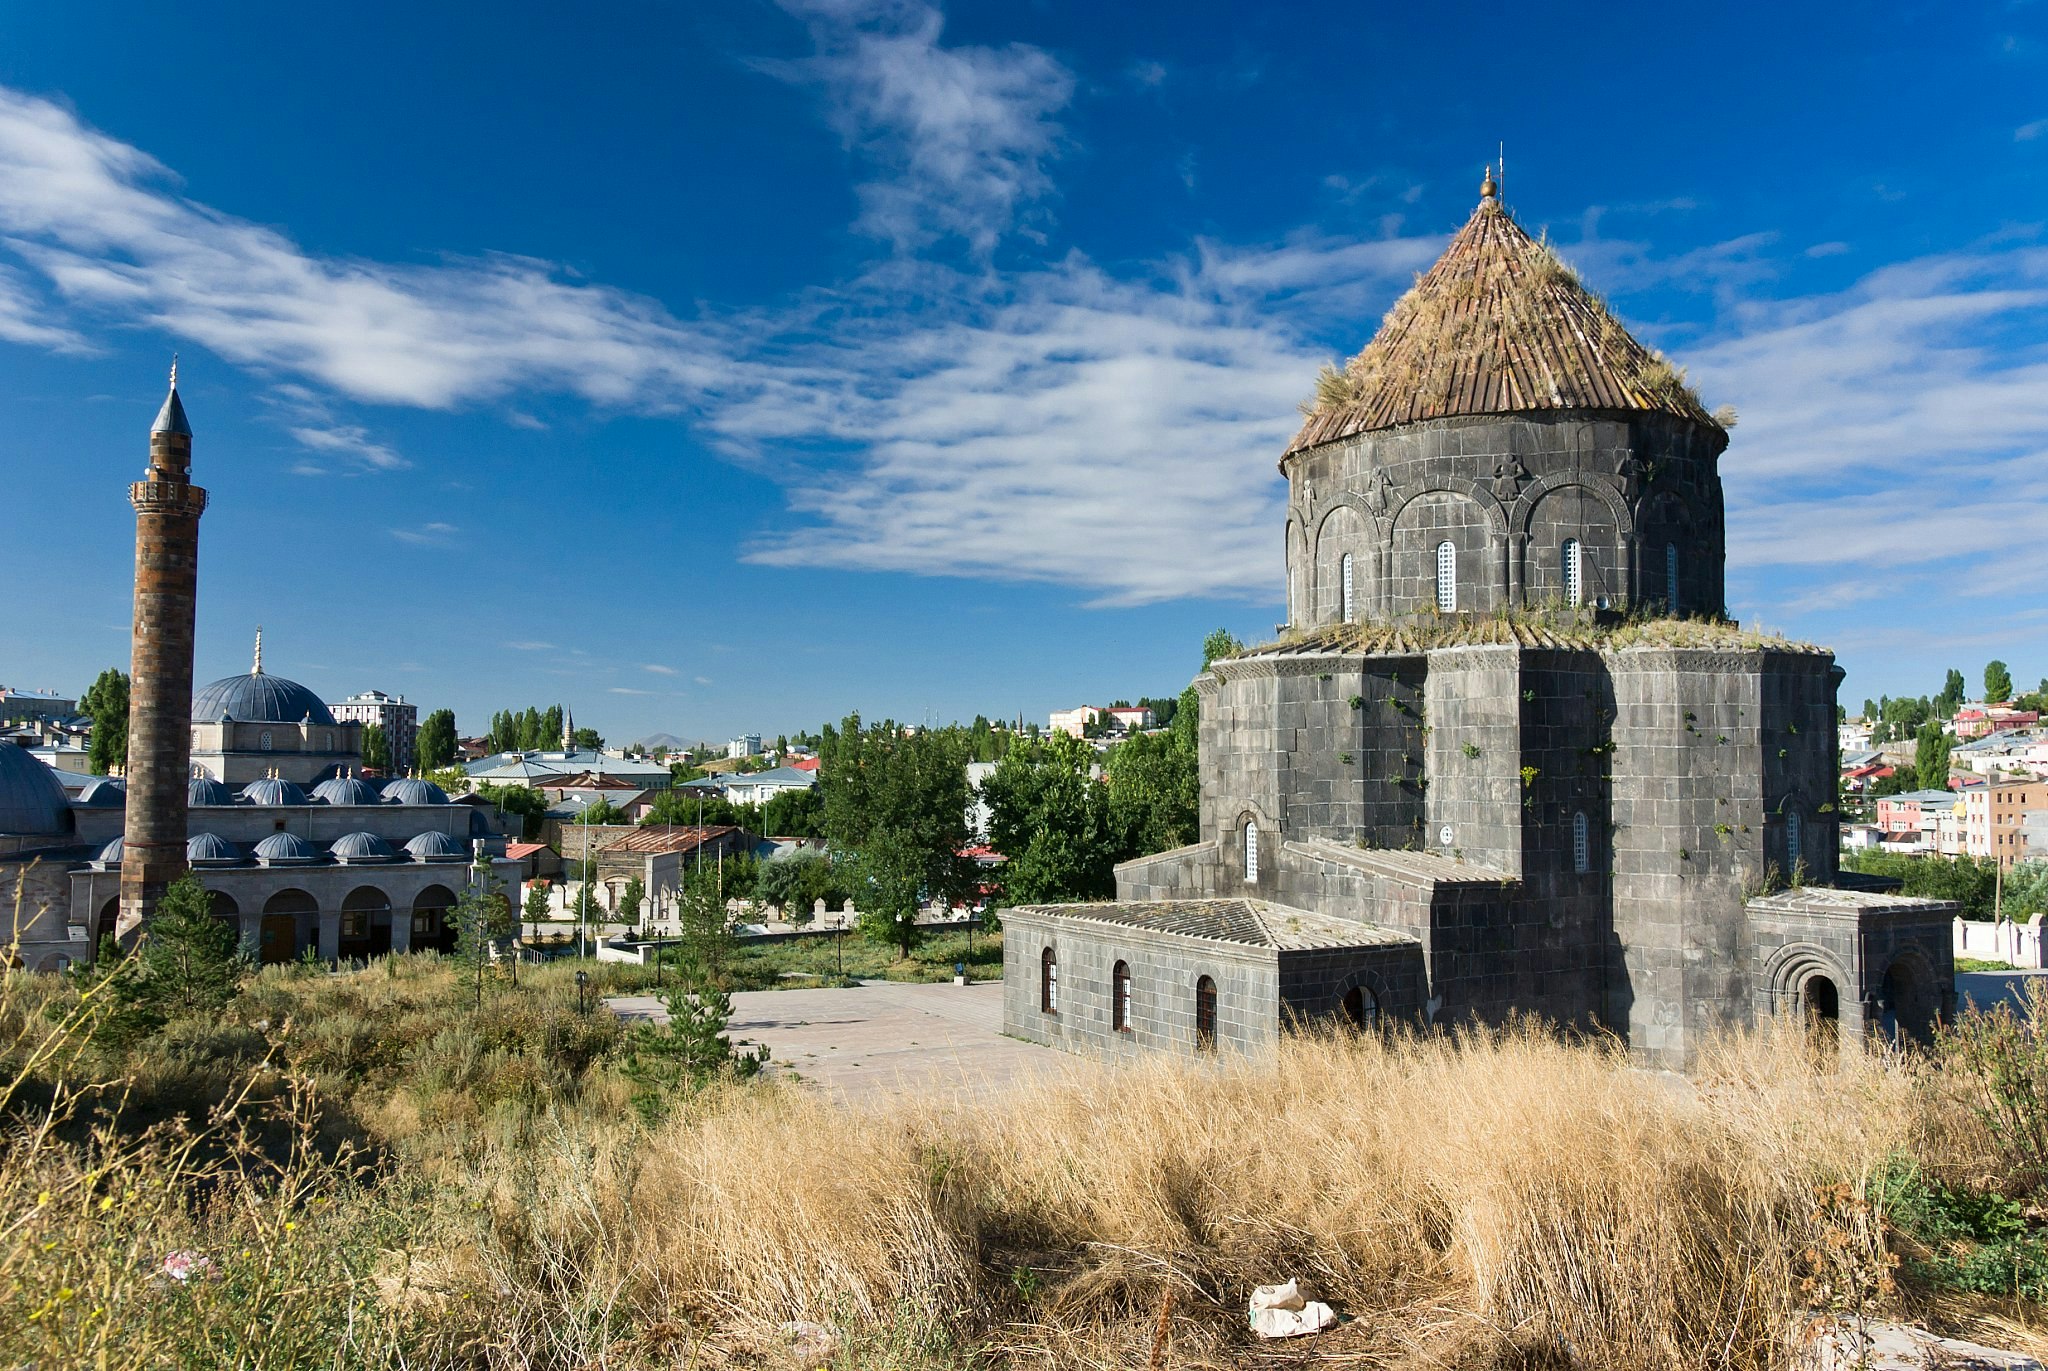 An imposing basalt church with a conical dome and porches below; next to it is a mosque with blue domes and a minaret.